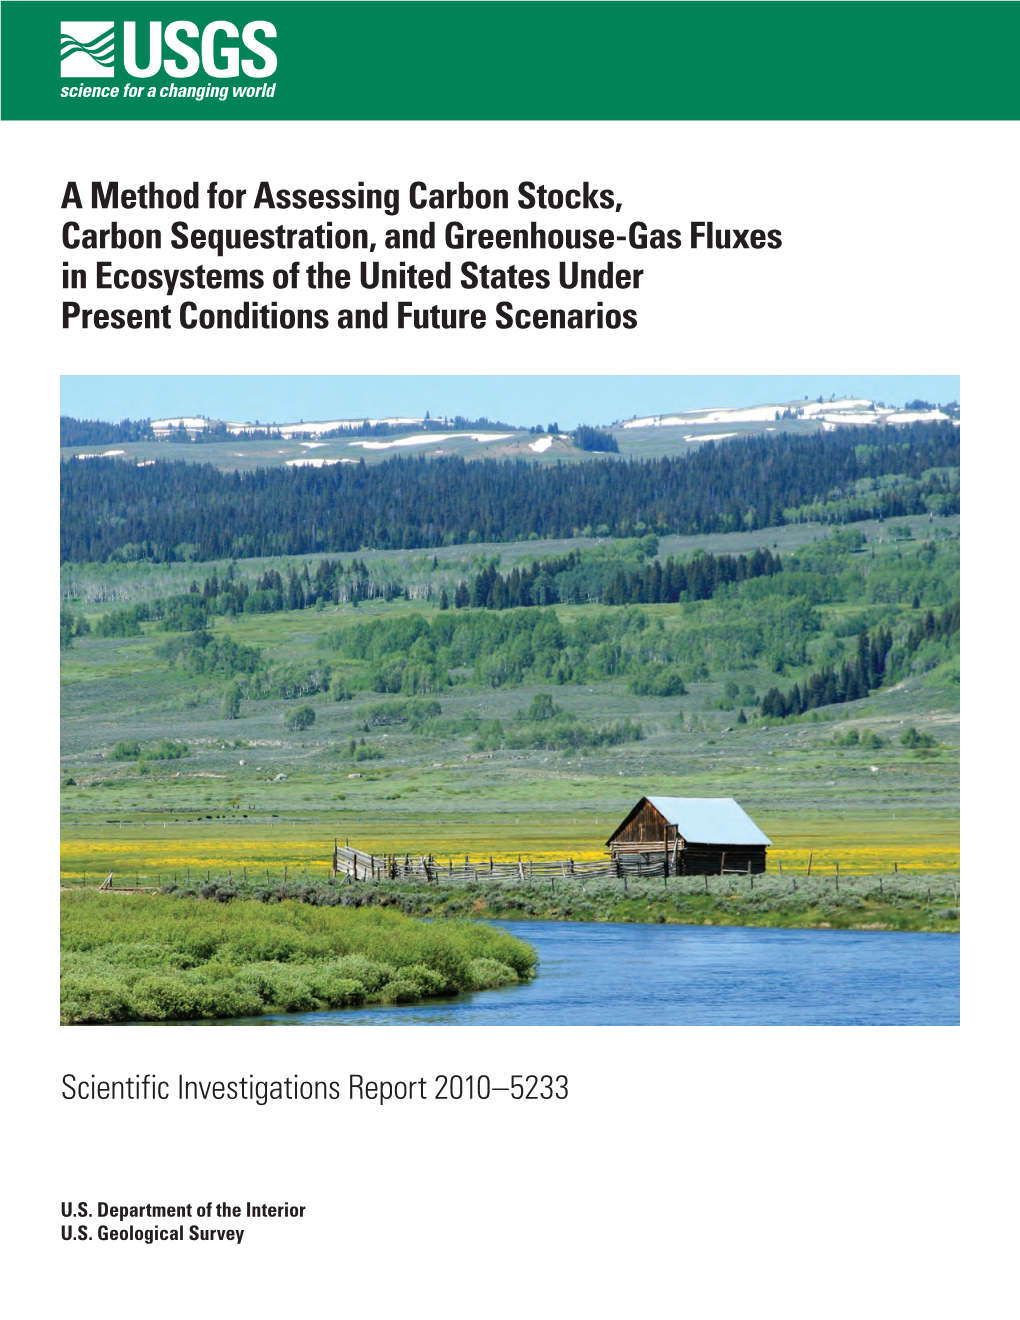 A Method for Assessing Carbon Stocks, Carbon Sequestration, and Greenhouse-Gas Fluxes in Ecosystems of the United States Under Present Conditions and Future Scenarios